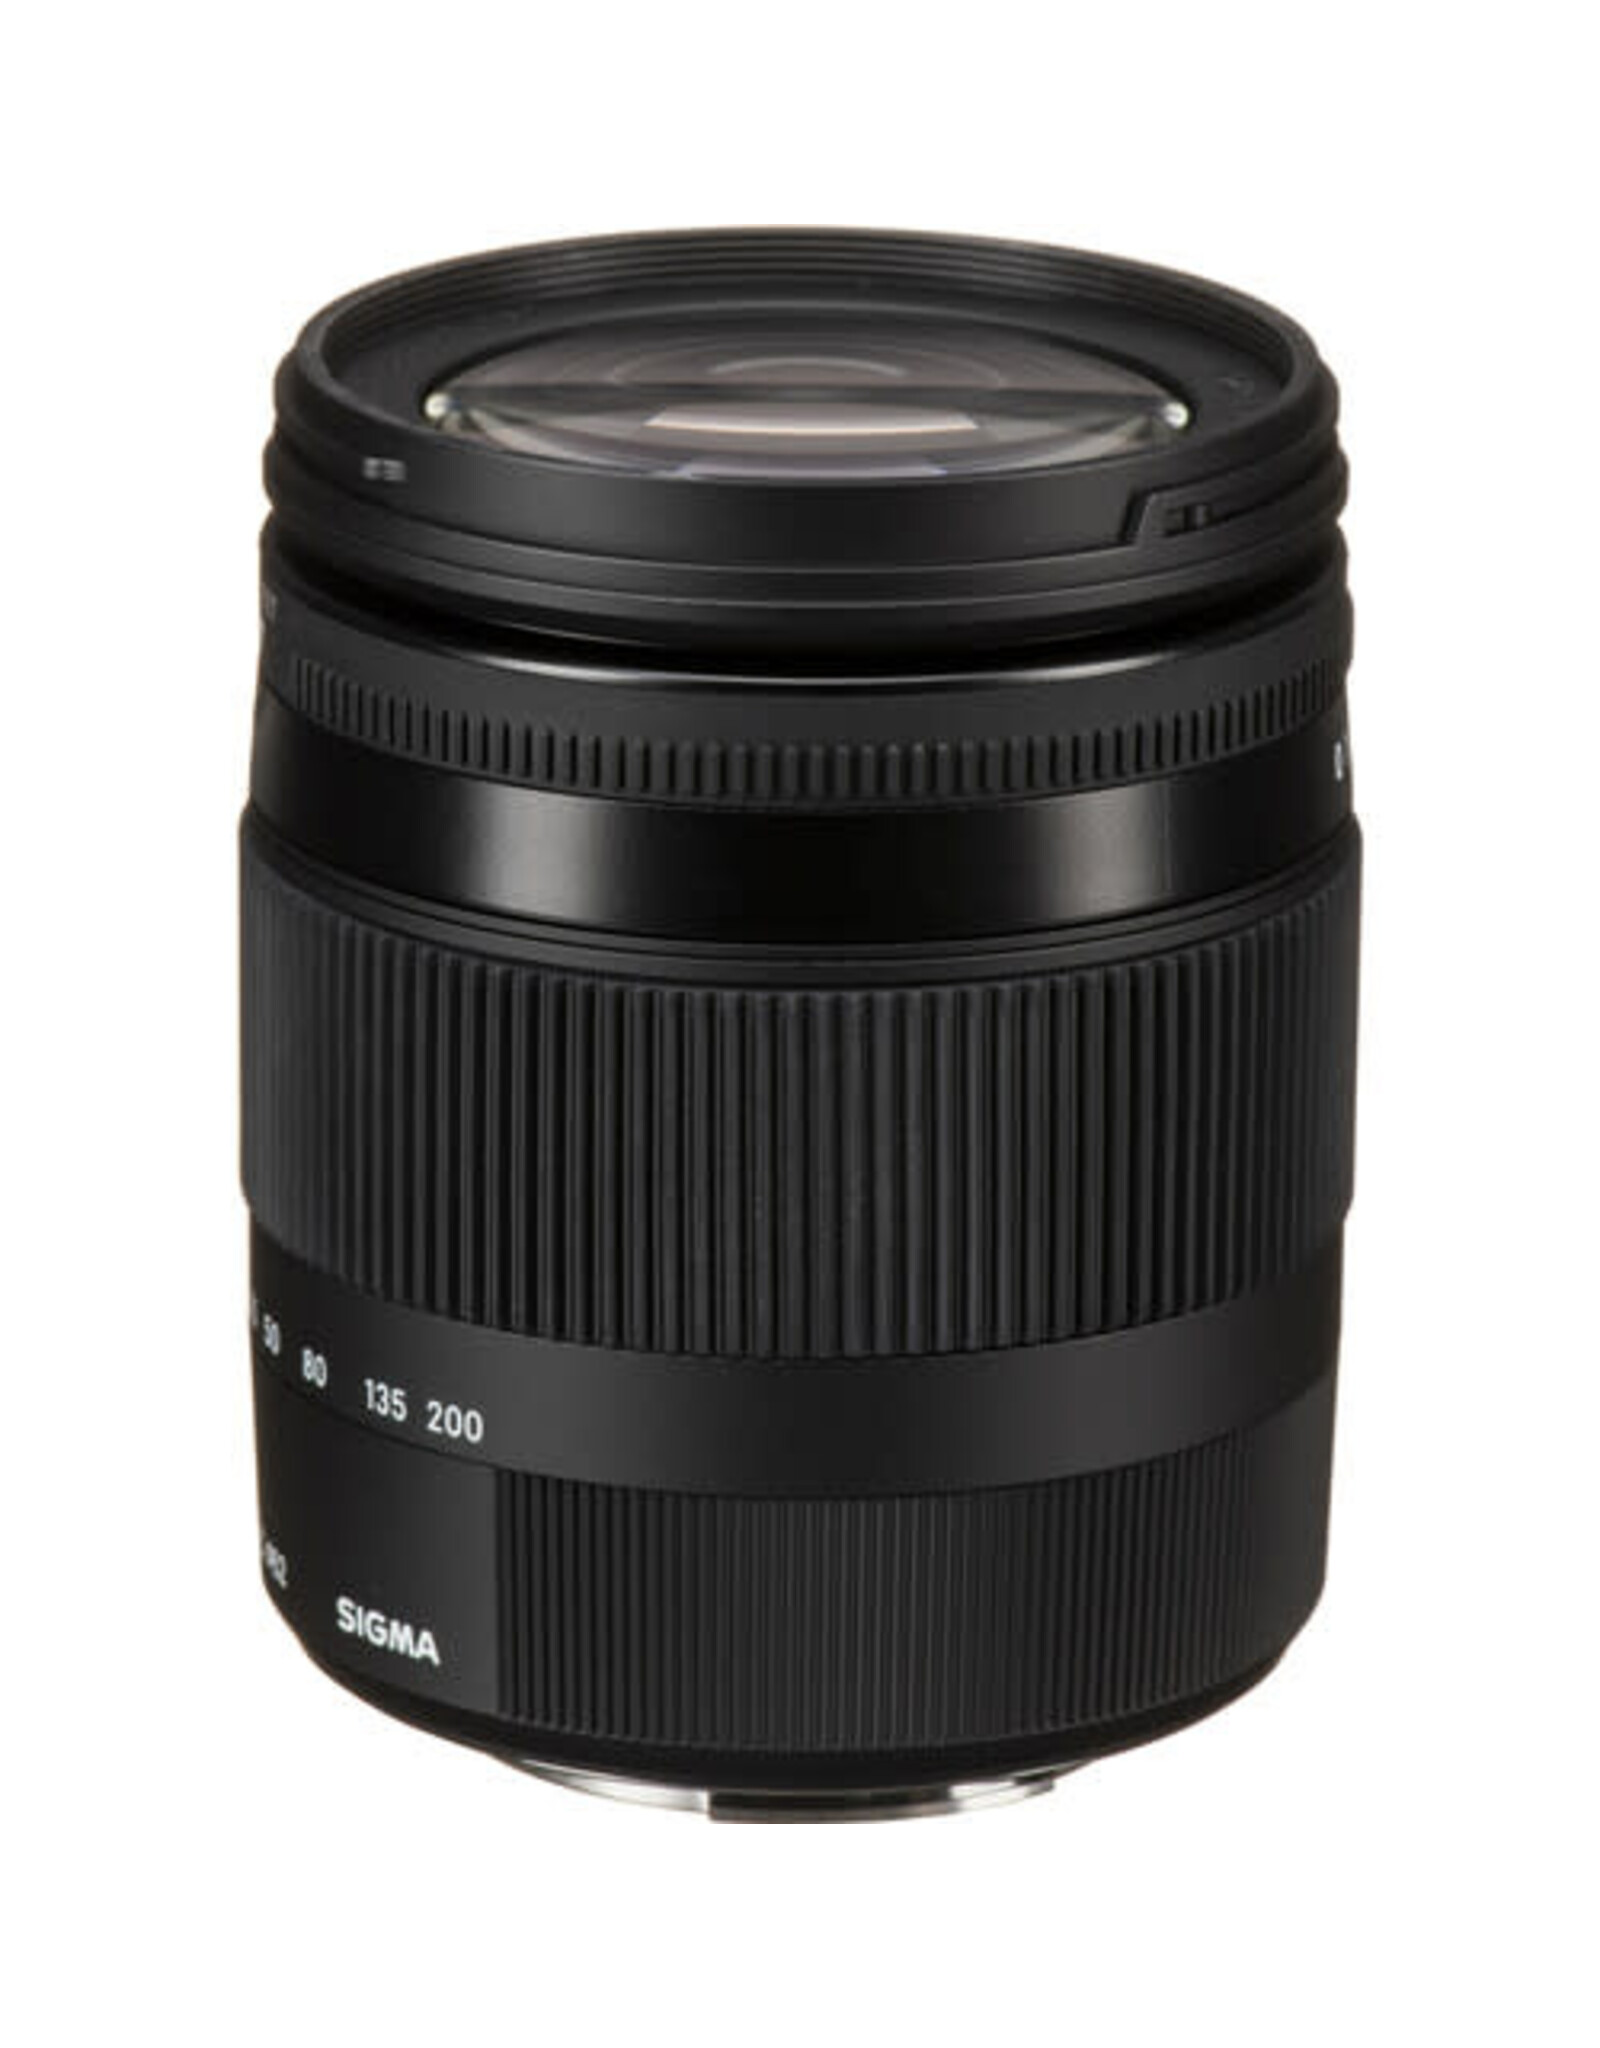 Sigma Sigma 18-200mm f/3.5-6.3 DC Macro HSM Contemporary Lens for Sony A